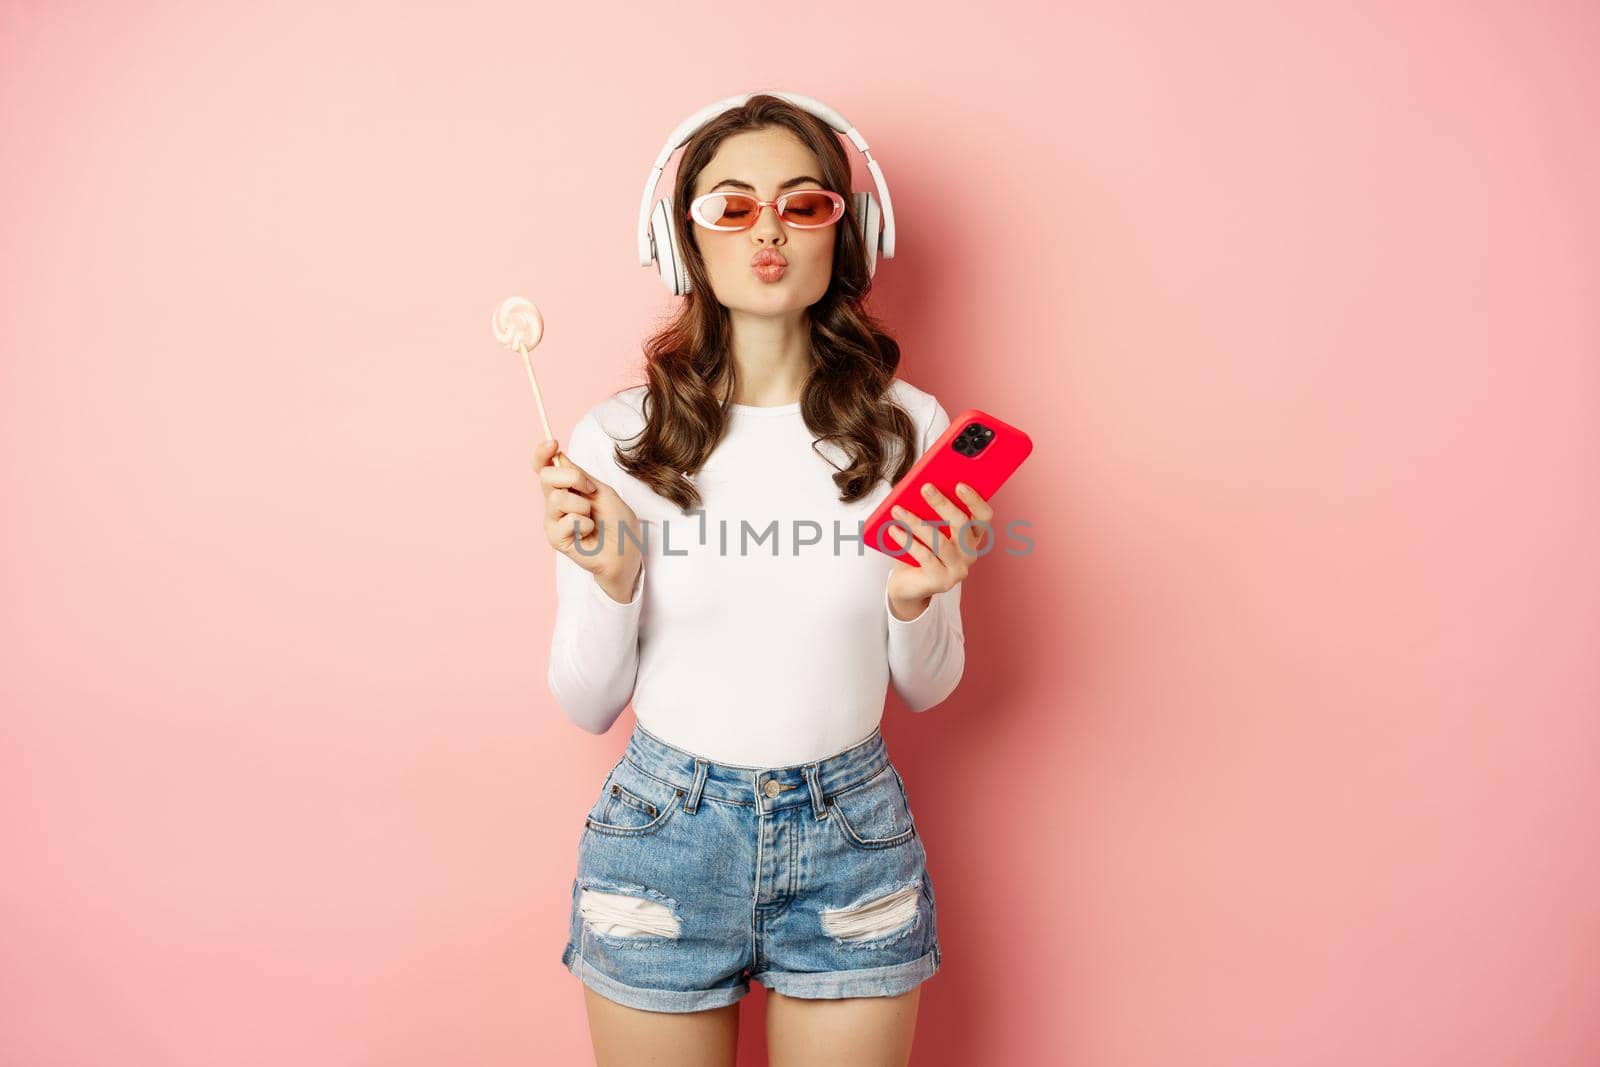 Stylish brunette woman dancing in headphones with mobile phone, listening music in earphones, licking lolipop, standing over pink background.